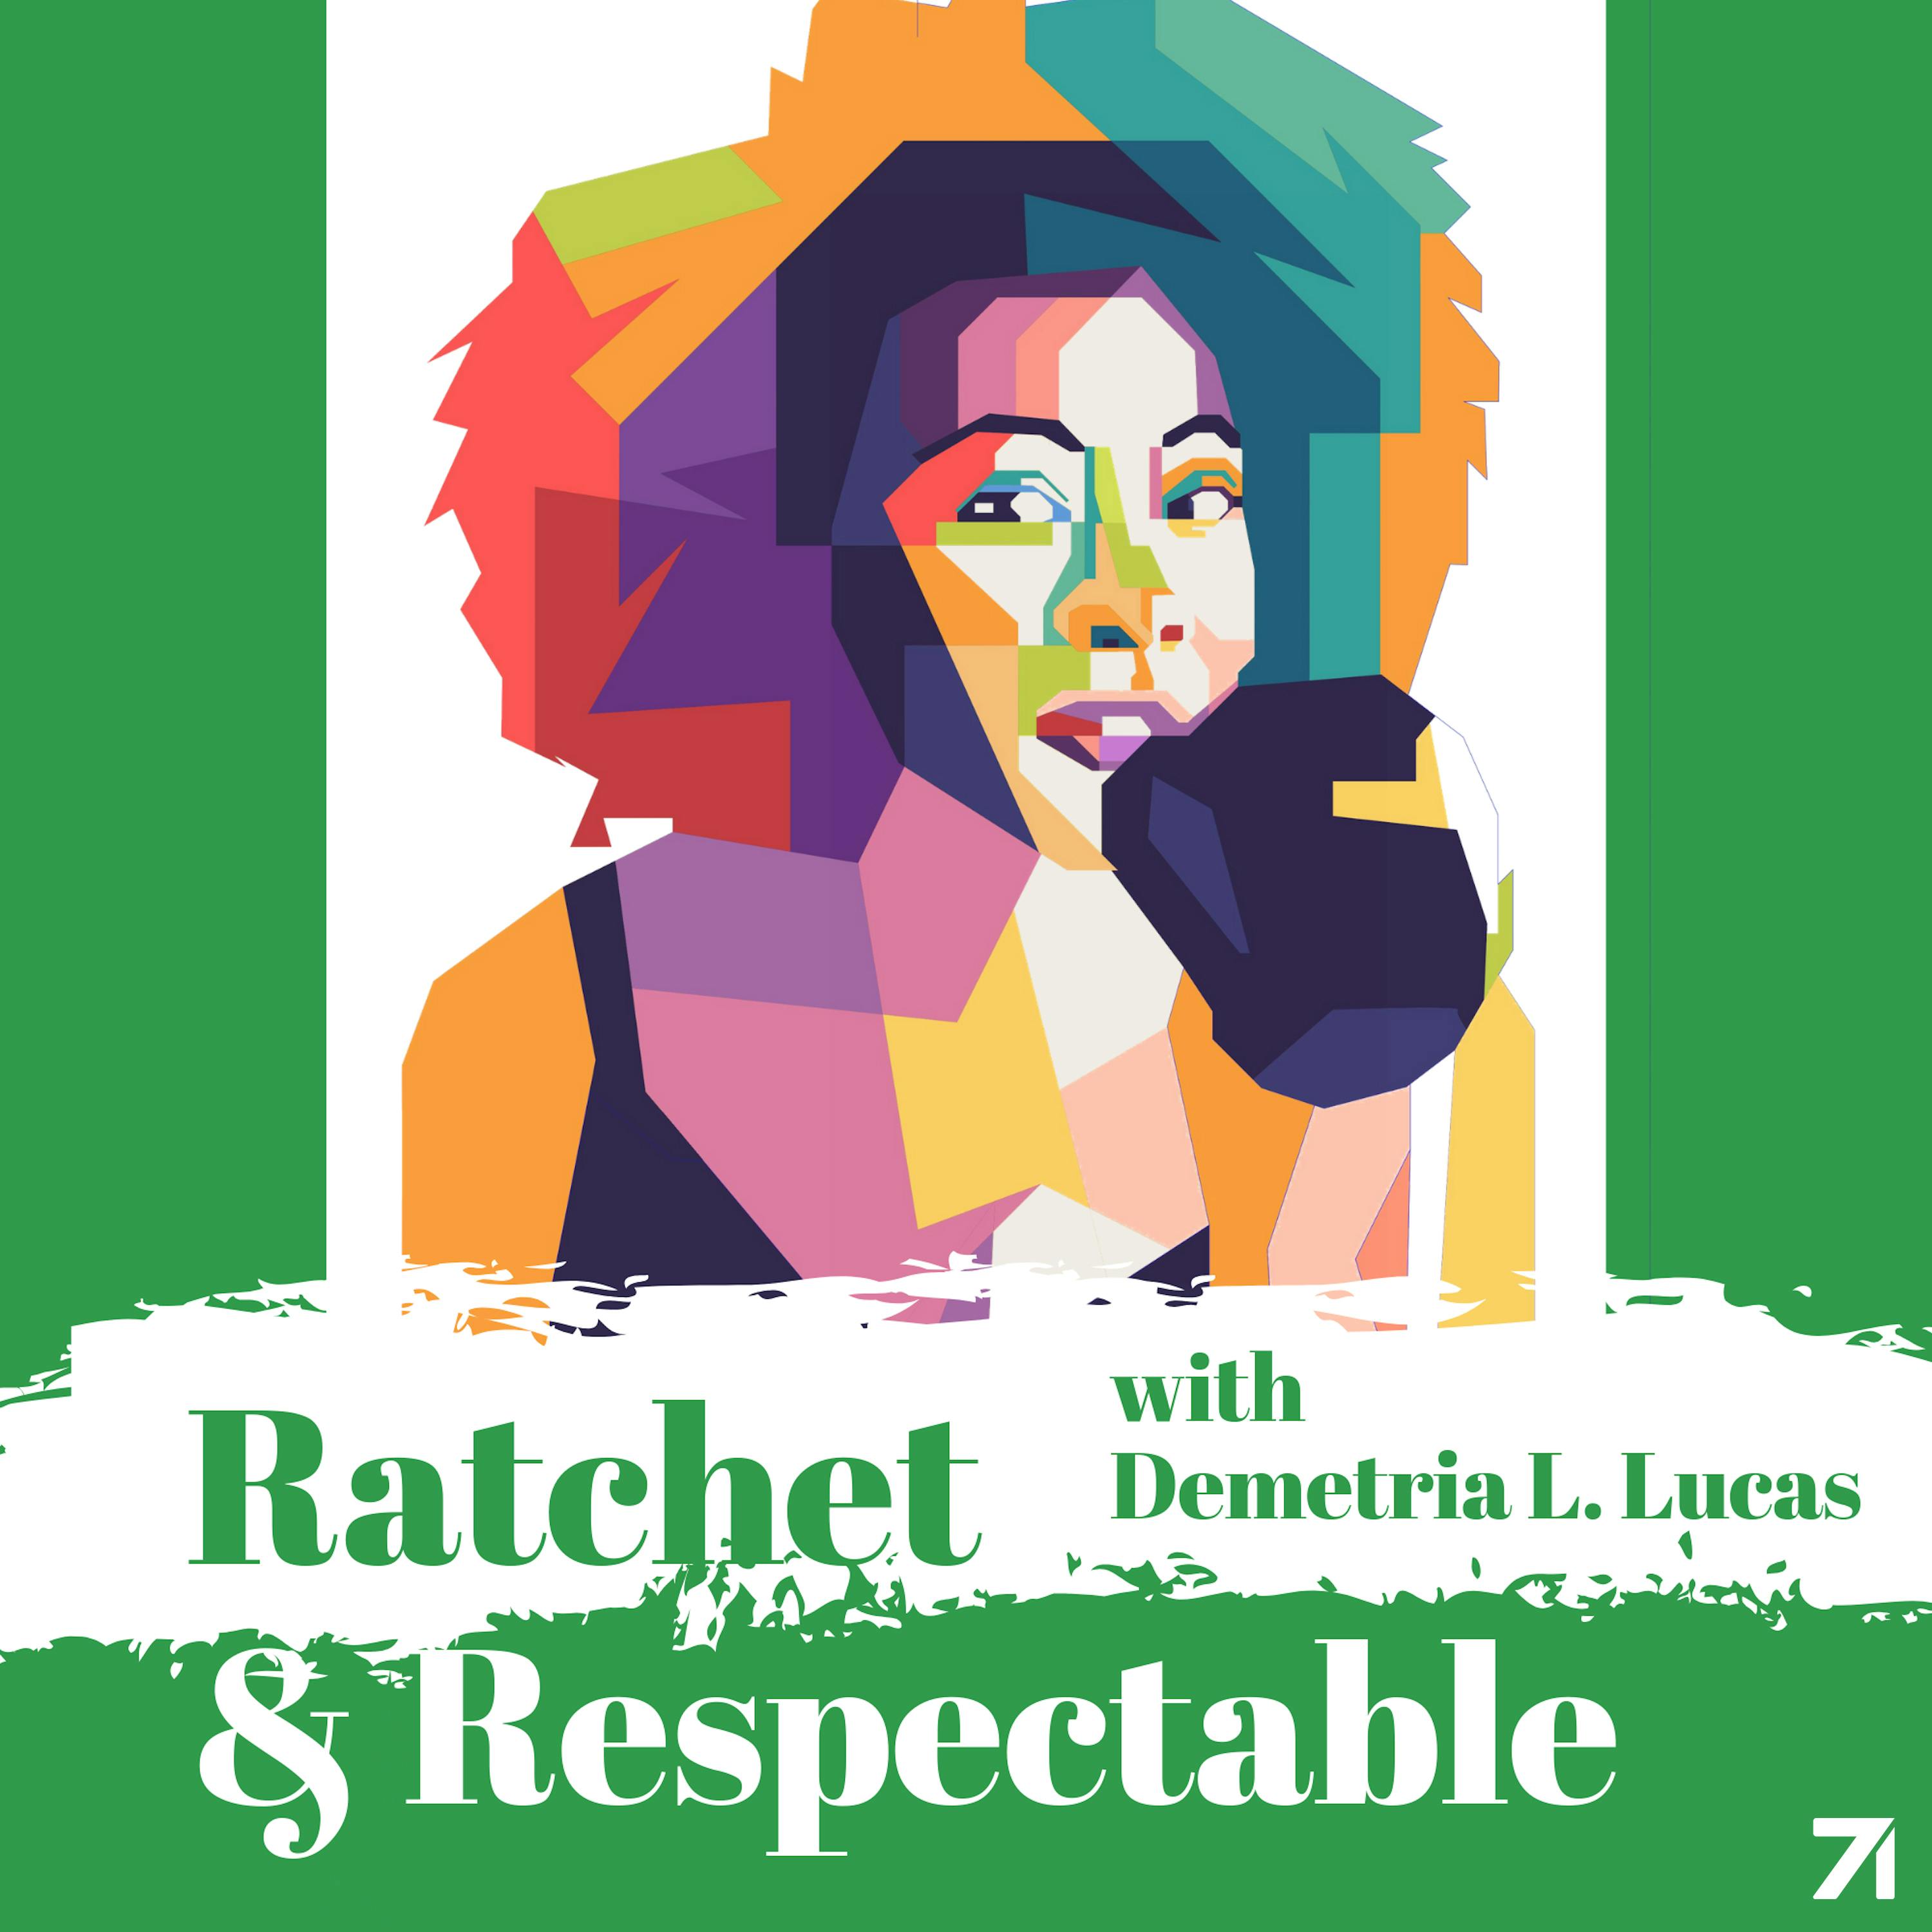 Ratchet & Respectable podcast show image